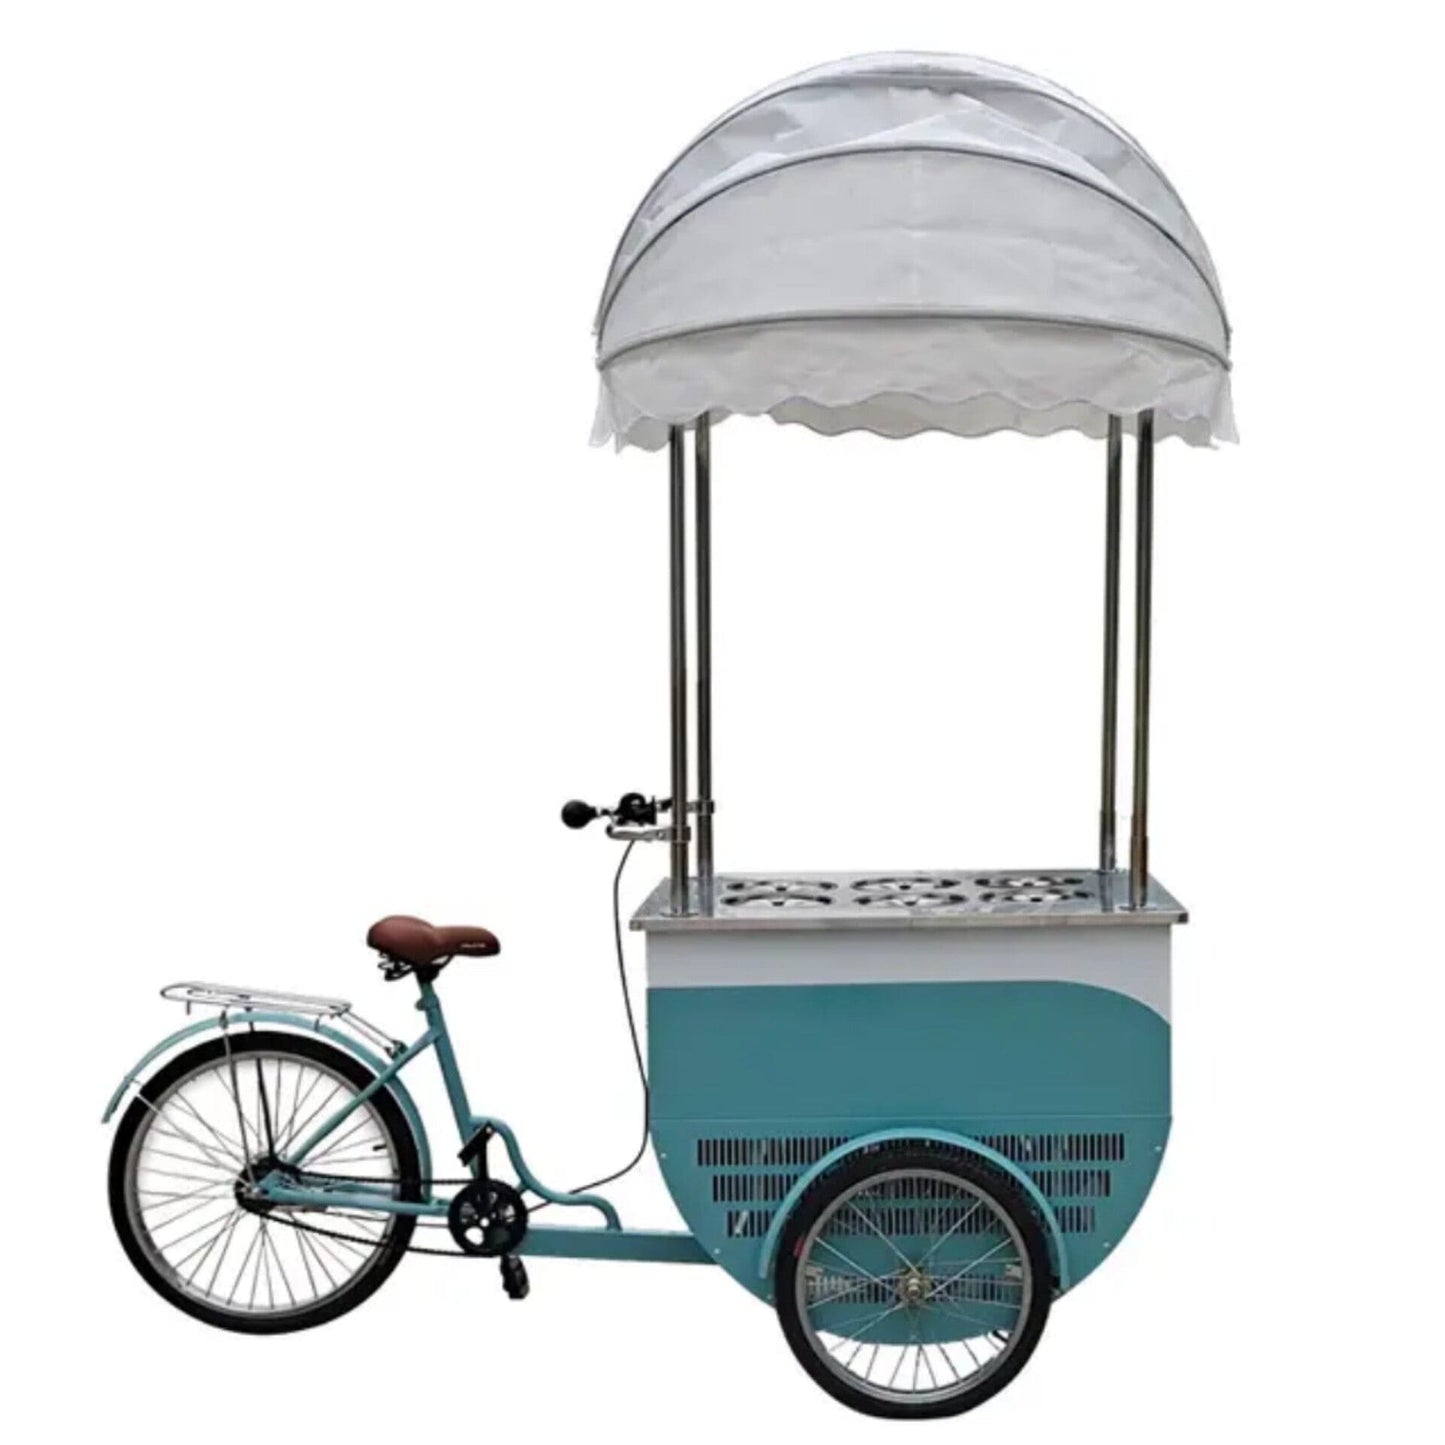 Ice Cream Cart With Freezer Any Color & Logos